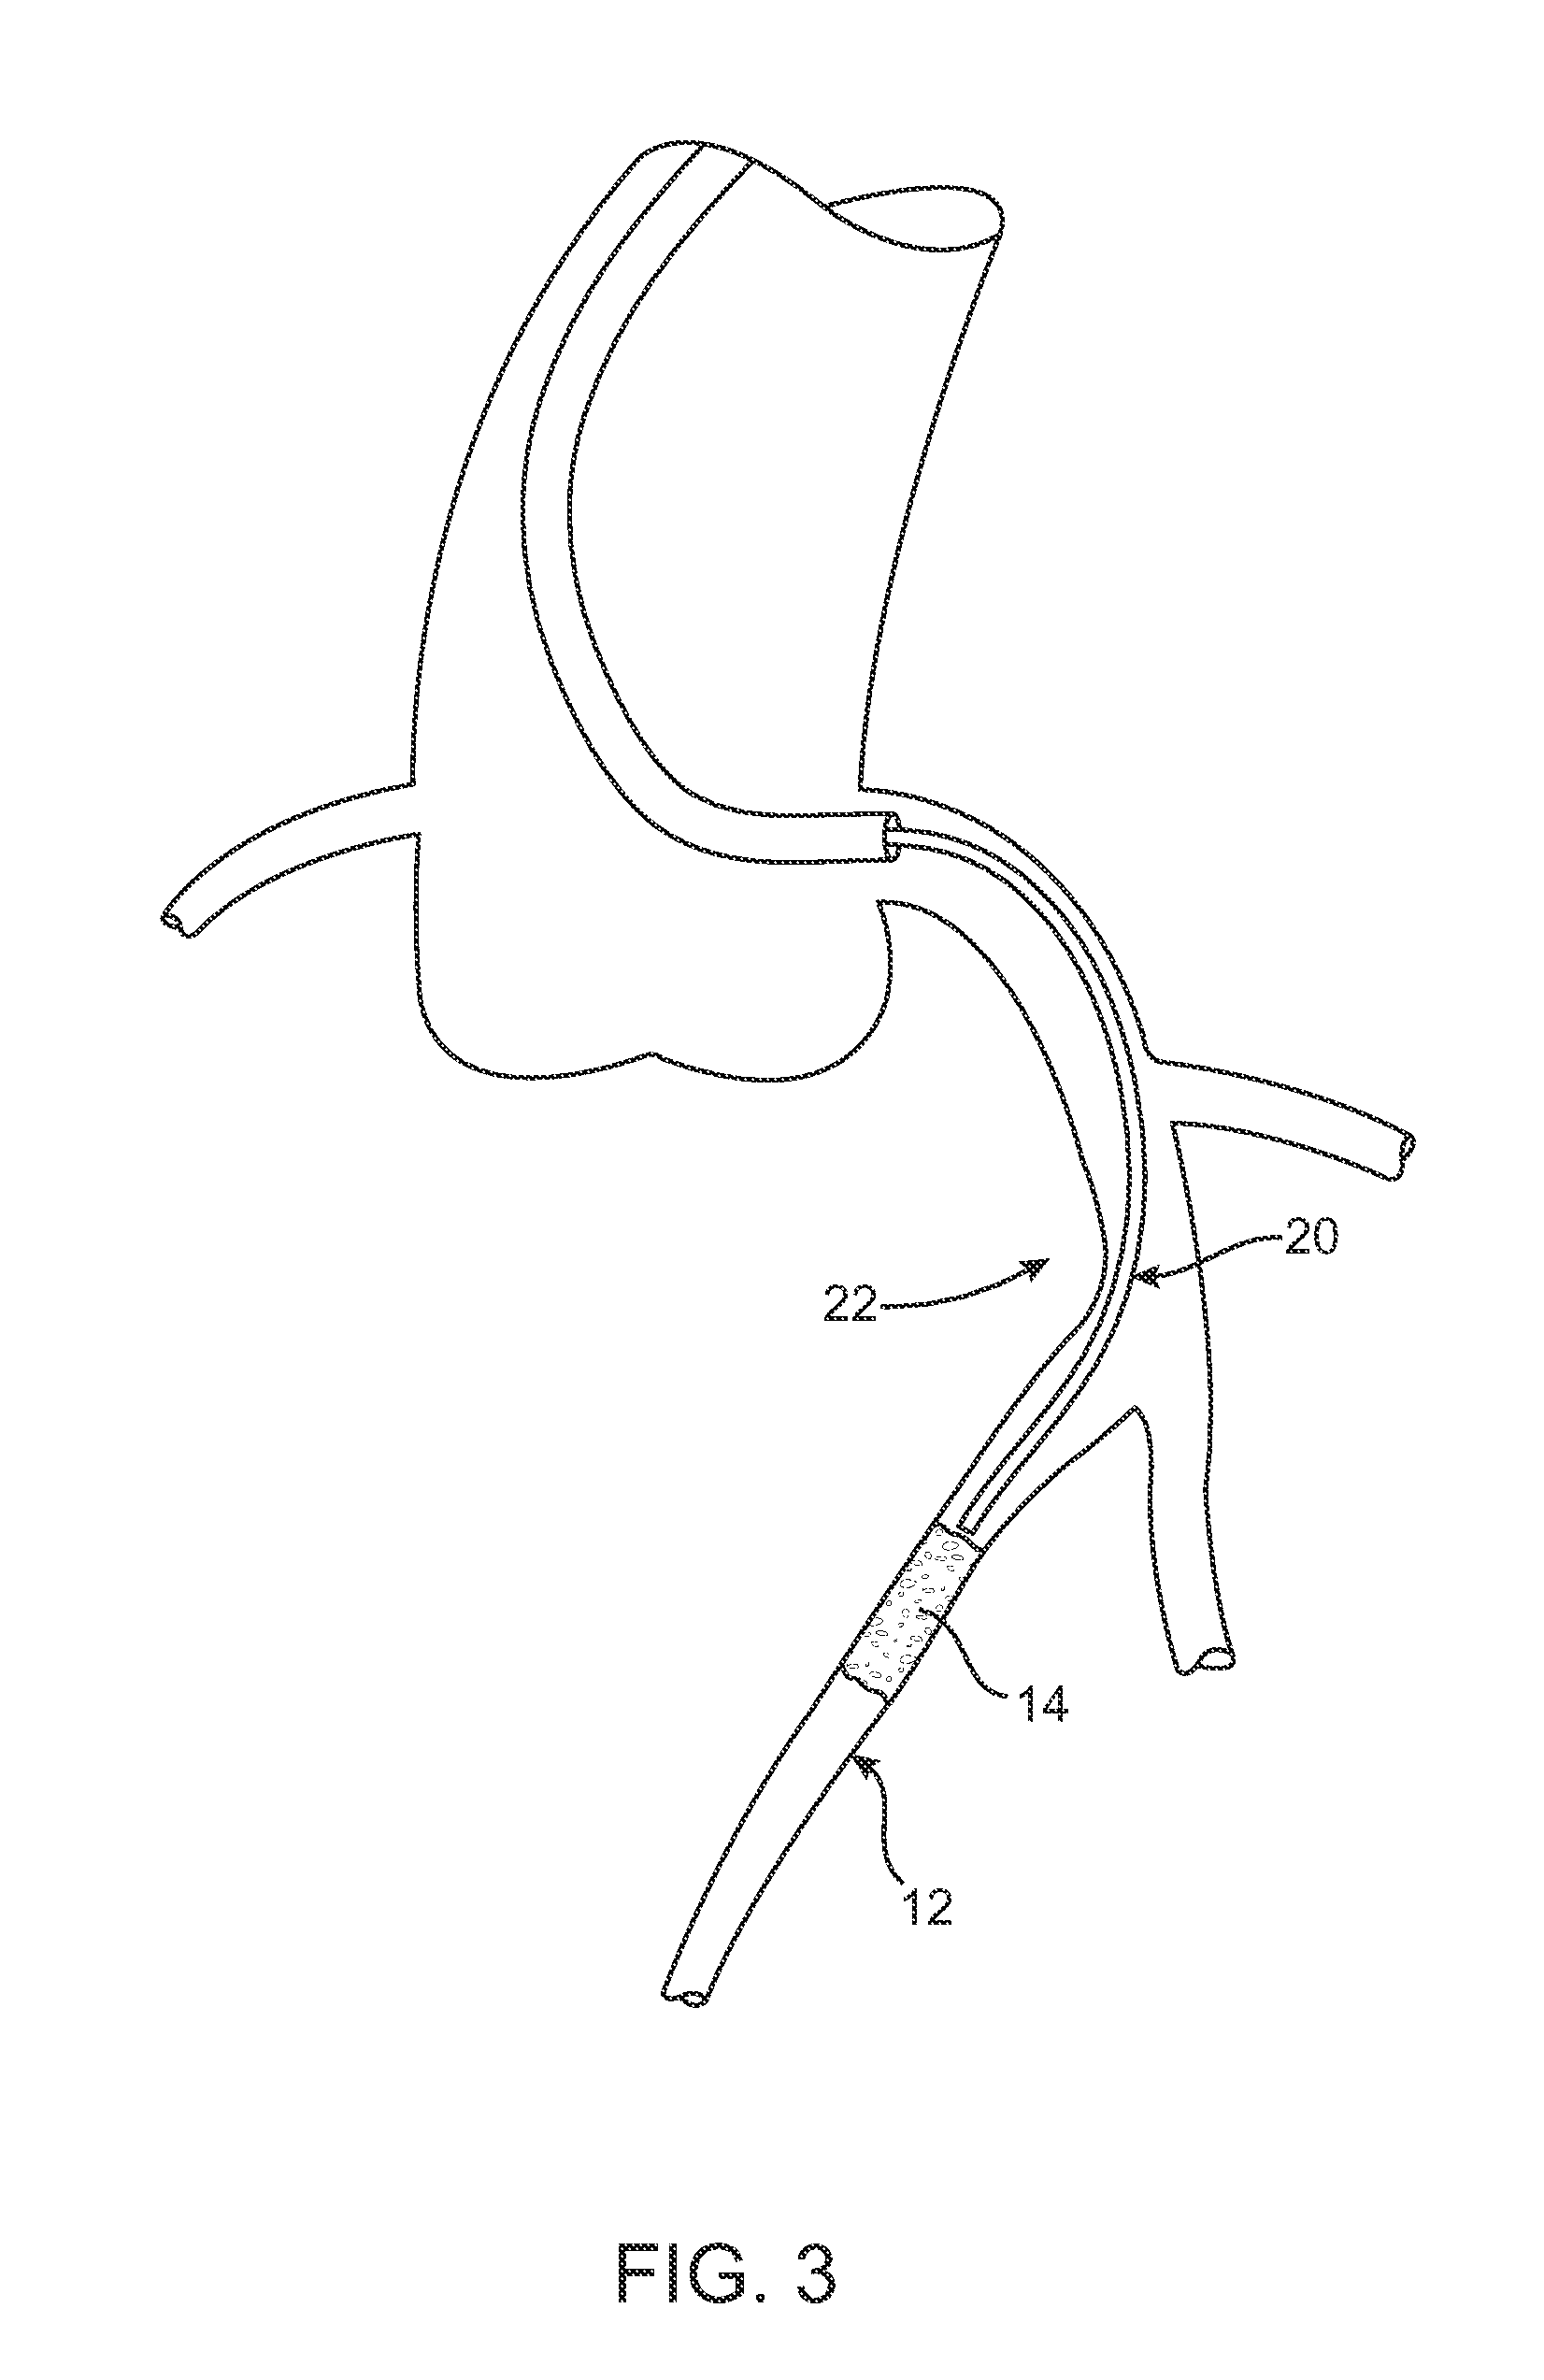 Drug-Eluting Device for Treatment of Chronic Total Occlusions